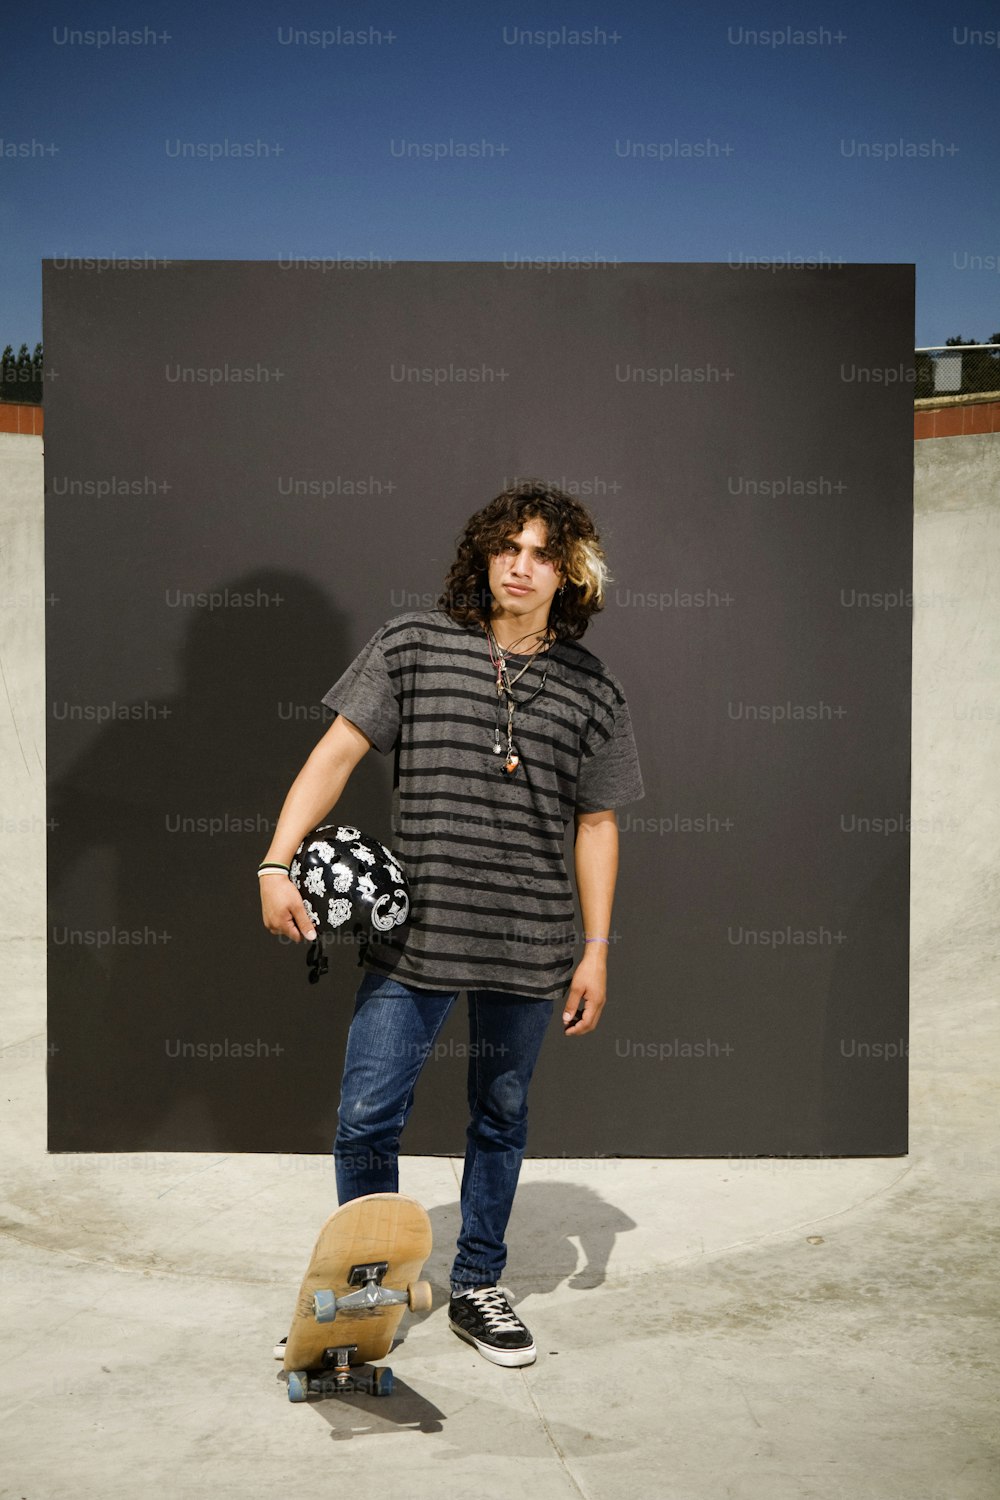 a man standing next to a skateboard in a skate park